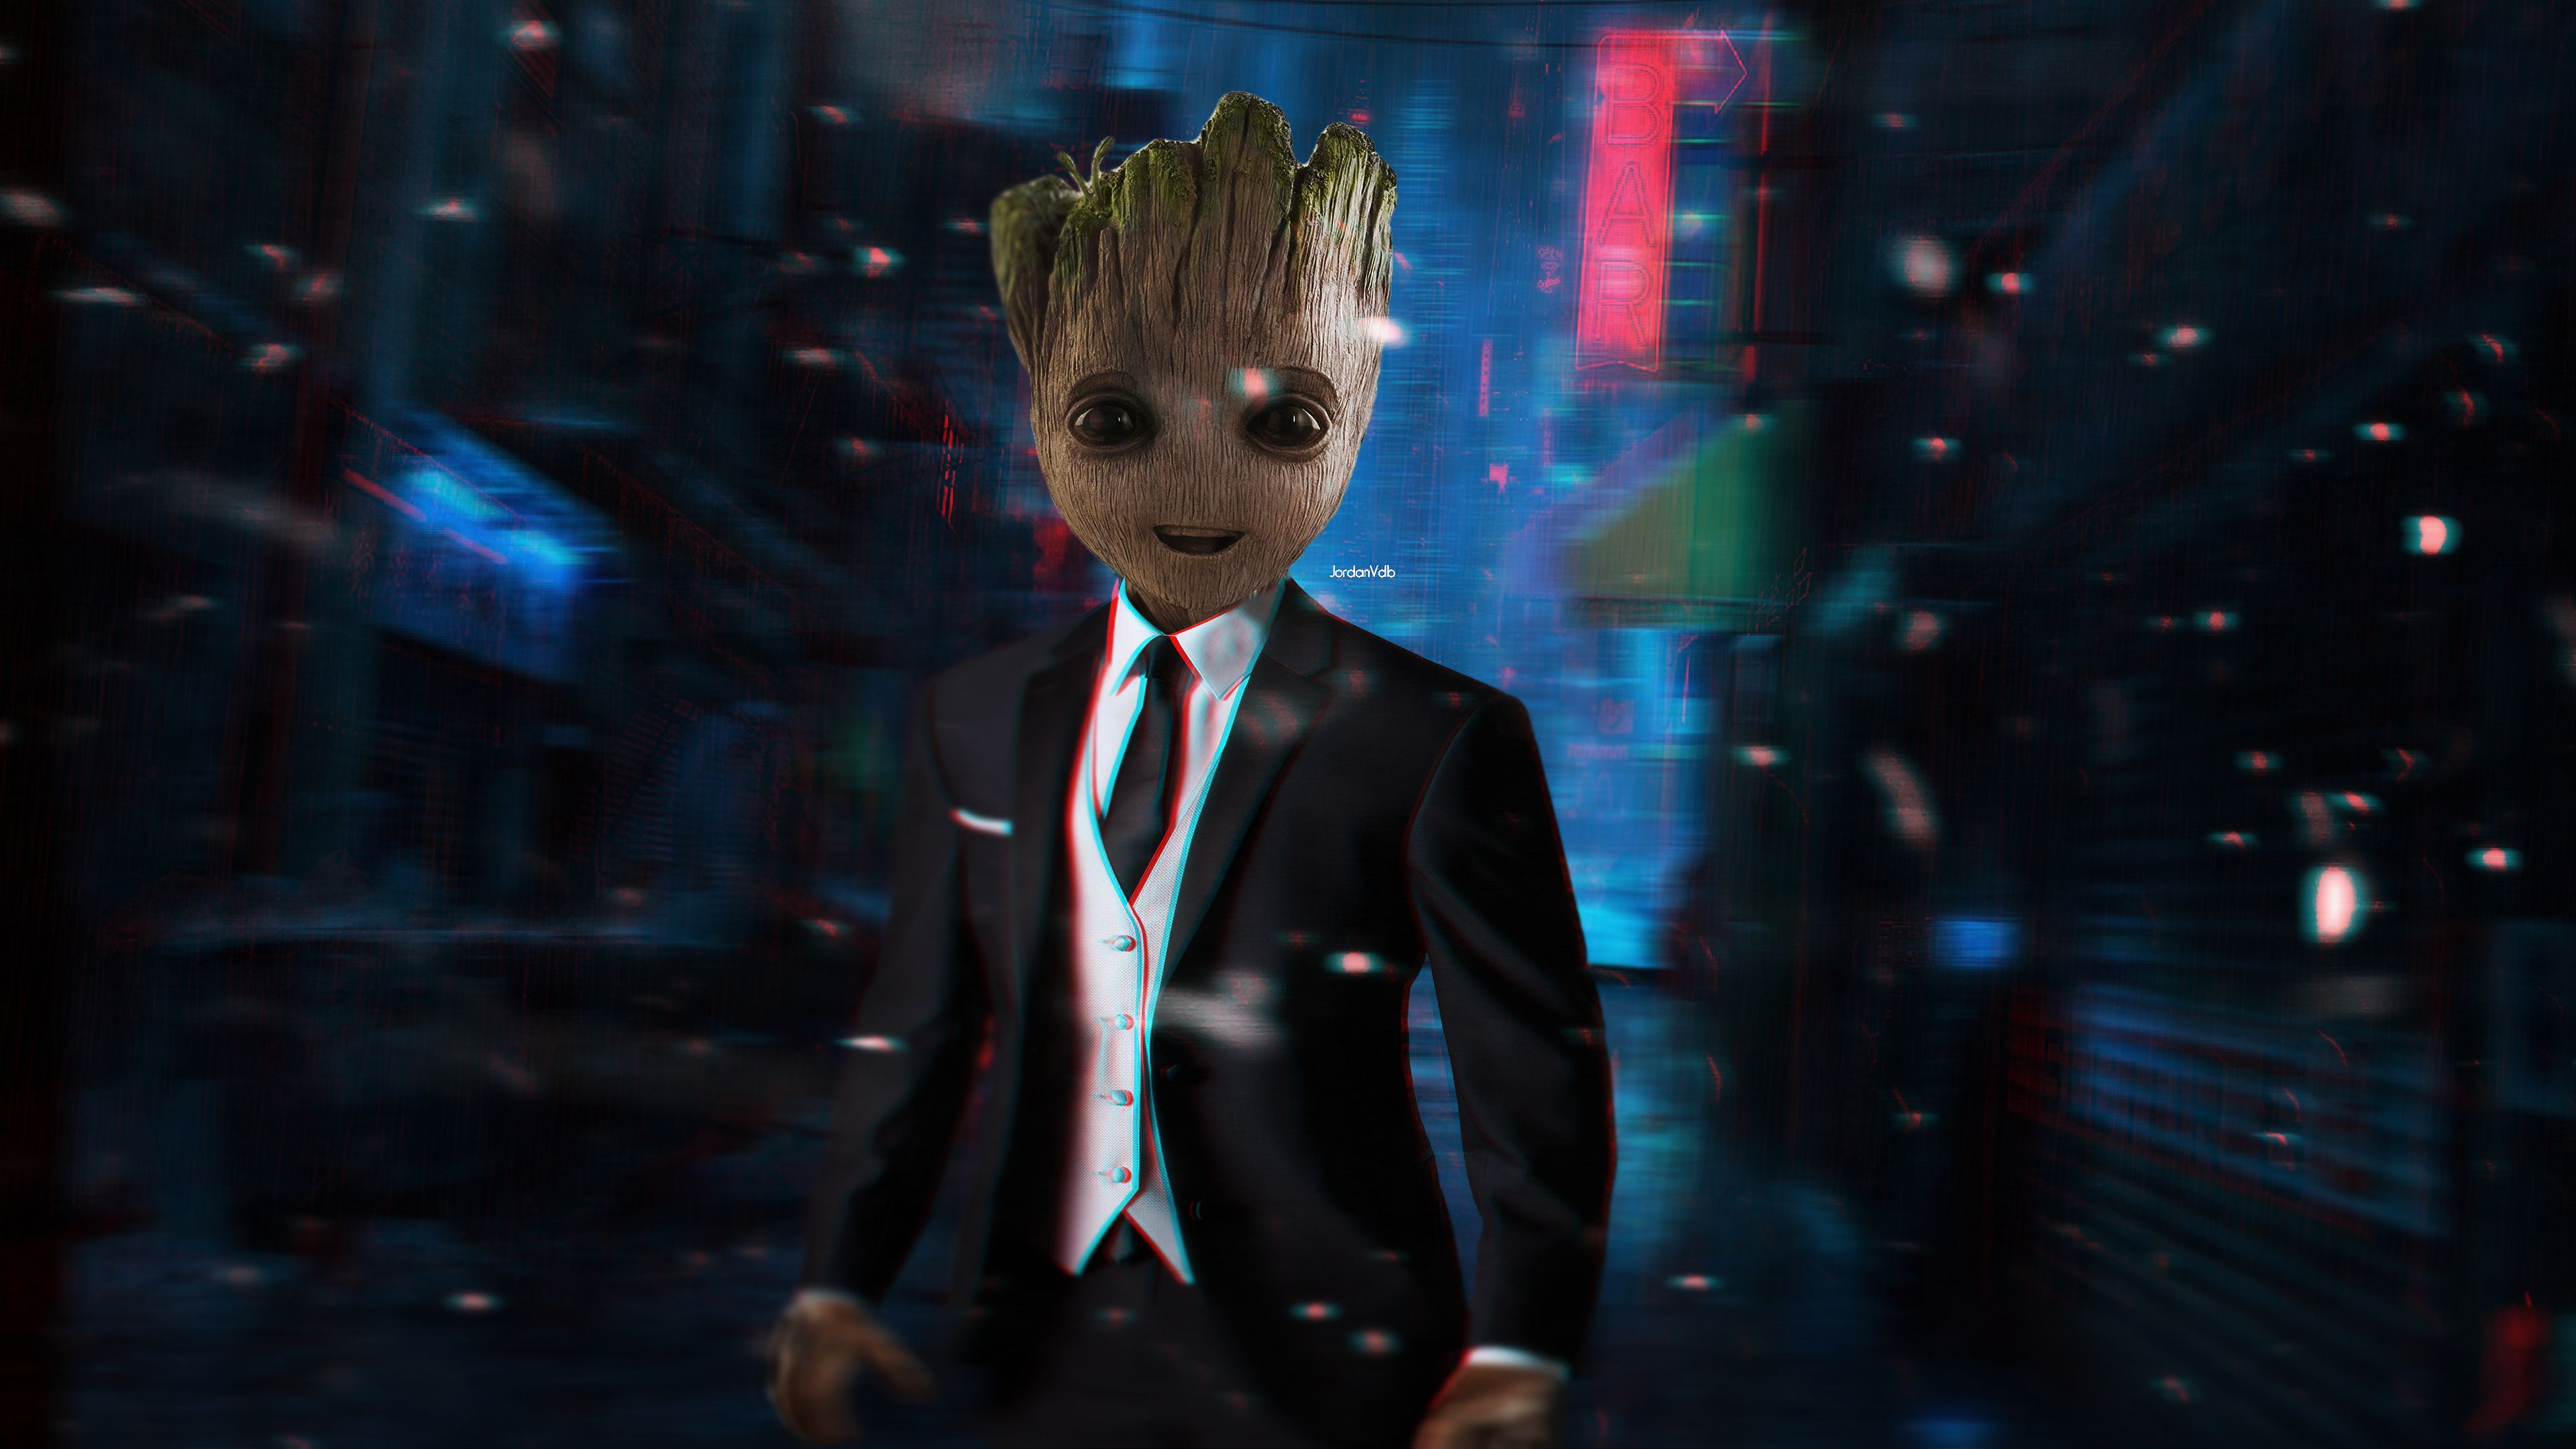 Cute Baby Groot In Suit 4K 1680x1050 Resolution Wallpaper, HD Superheroes 4K Wallpaper, Image, Photo and Background